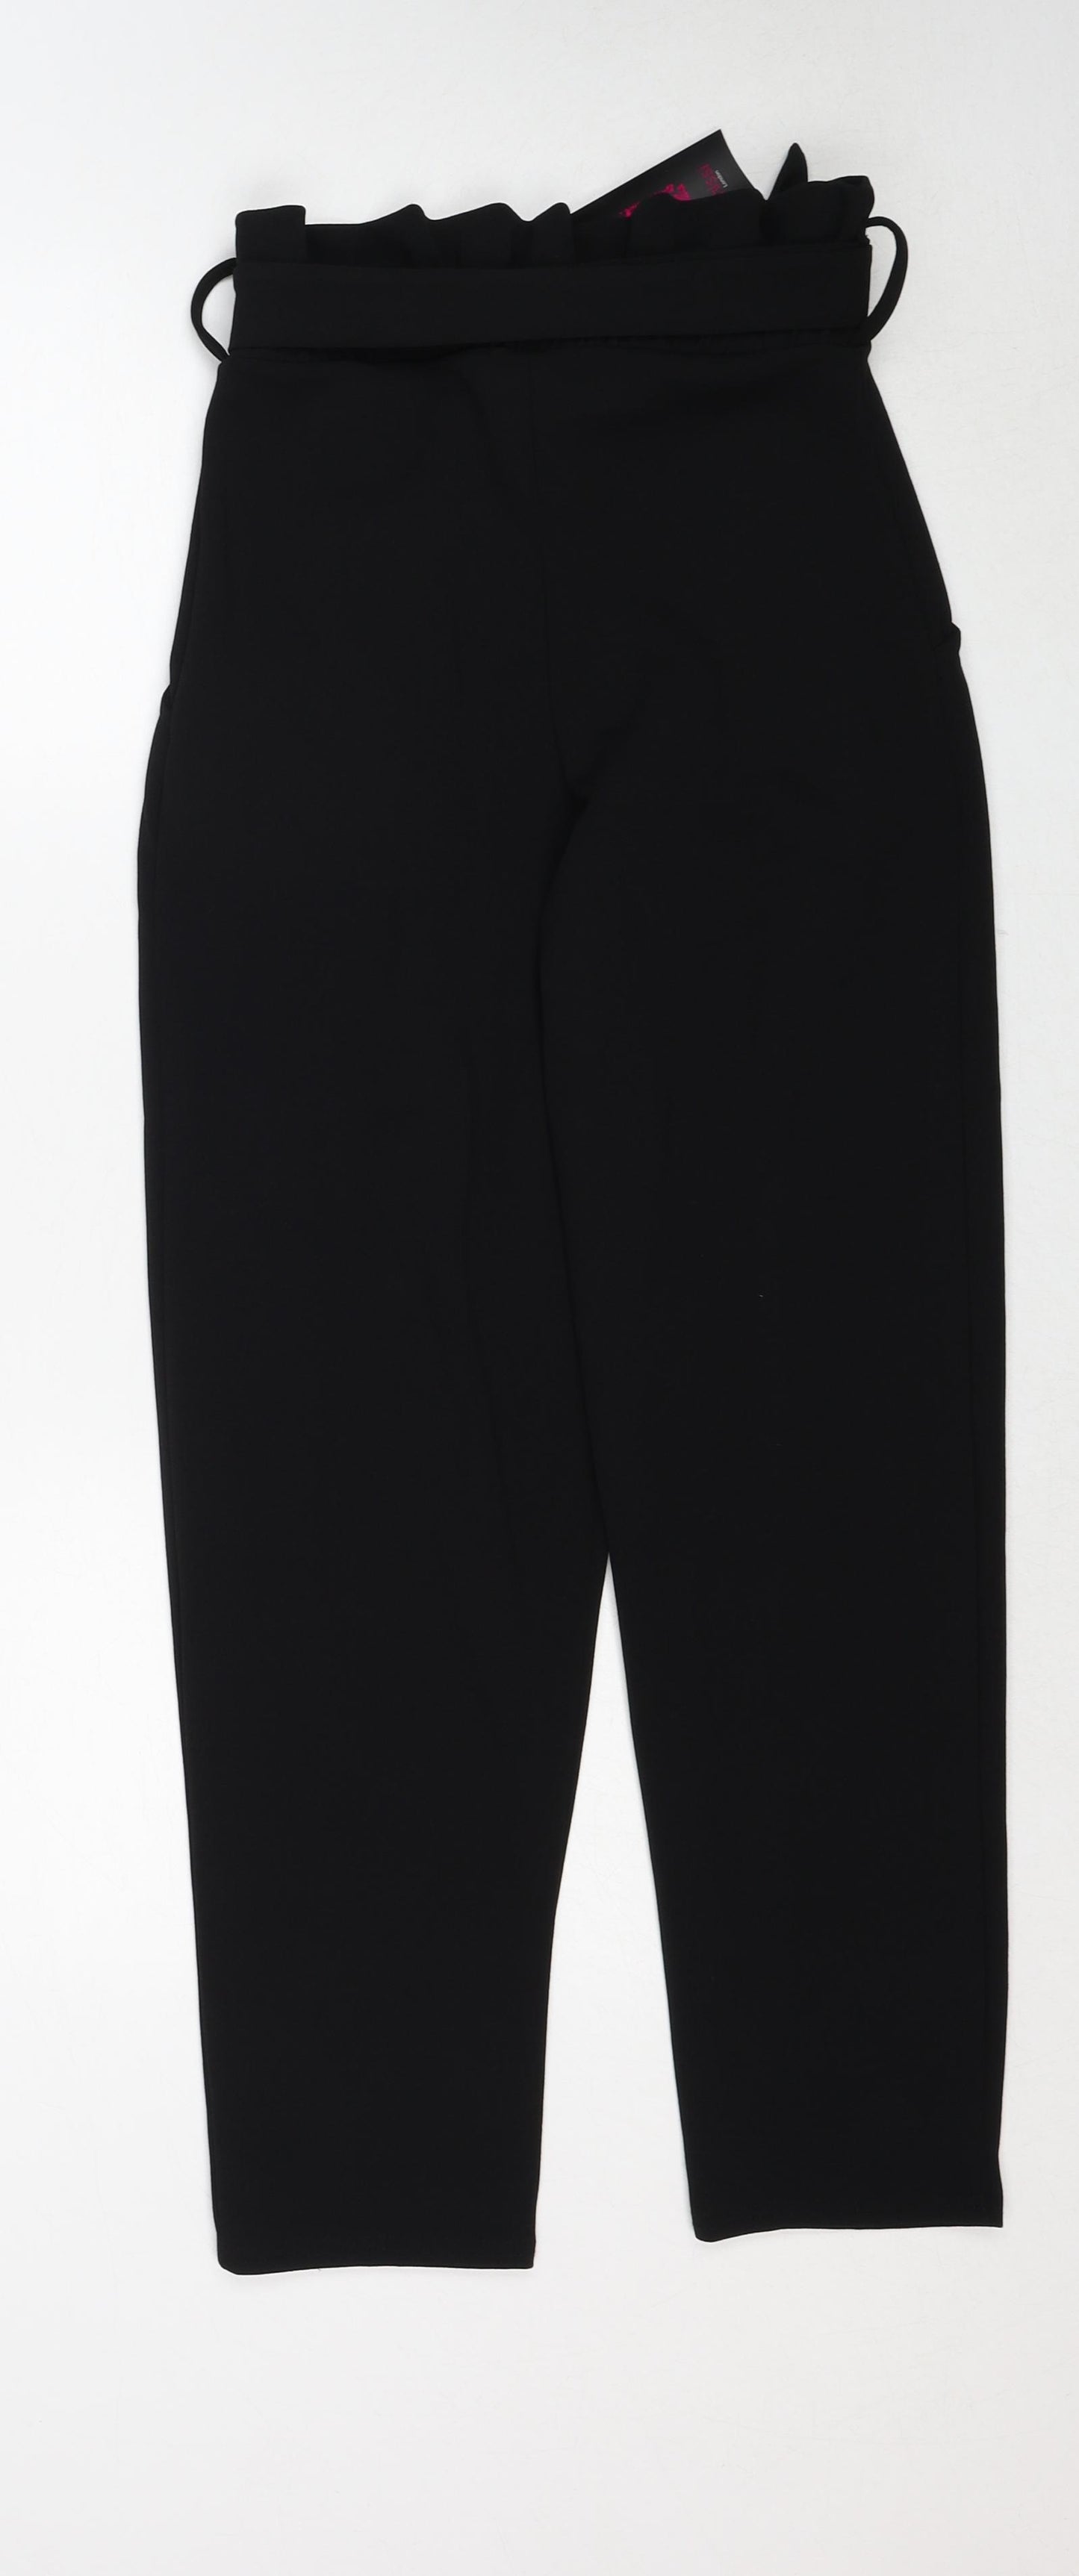 Missi London Womens Black Polyester Trousers Size 8 Regular